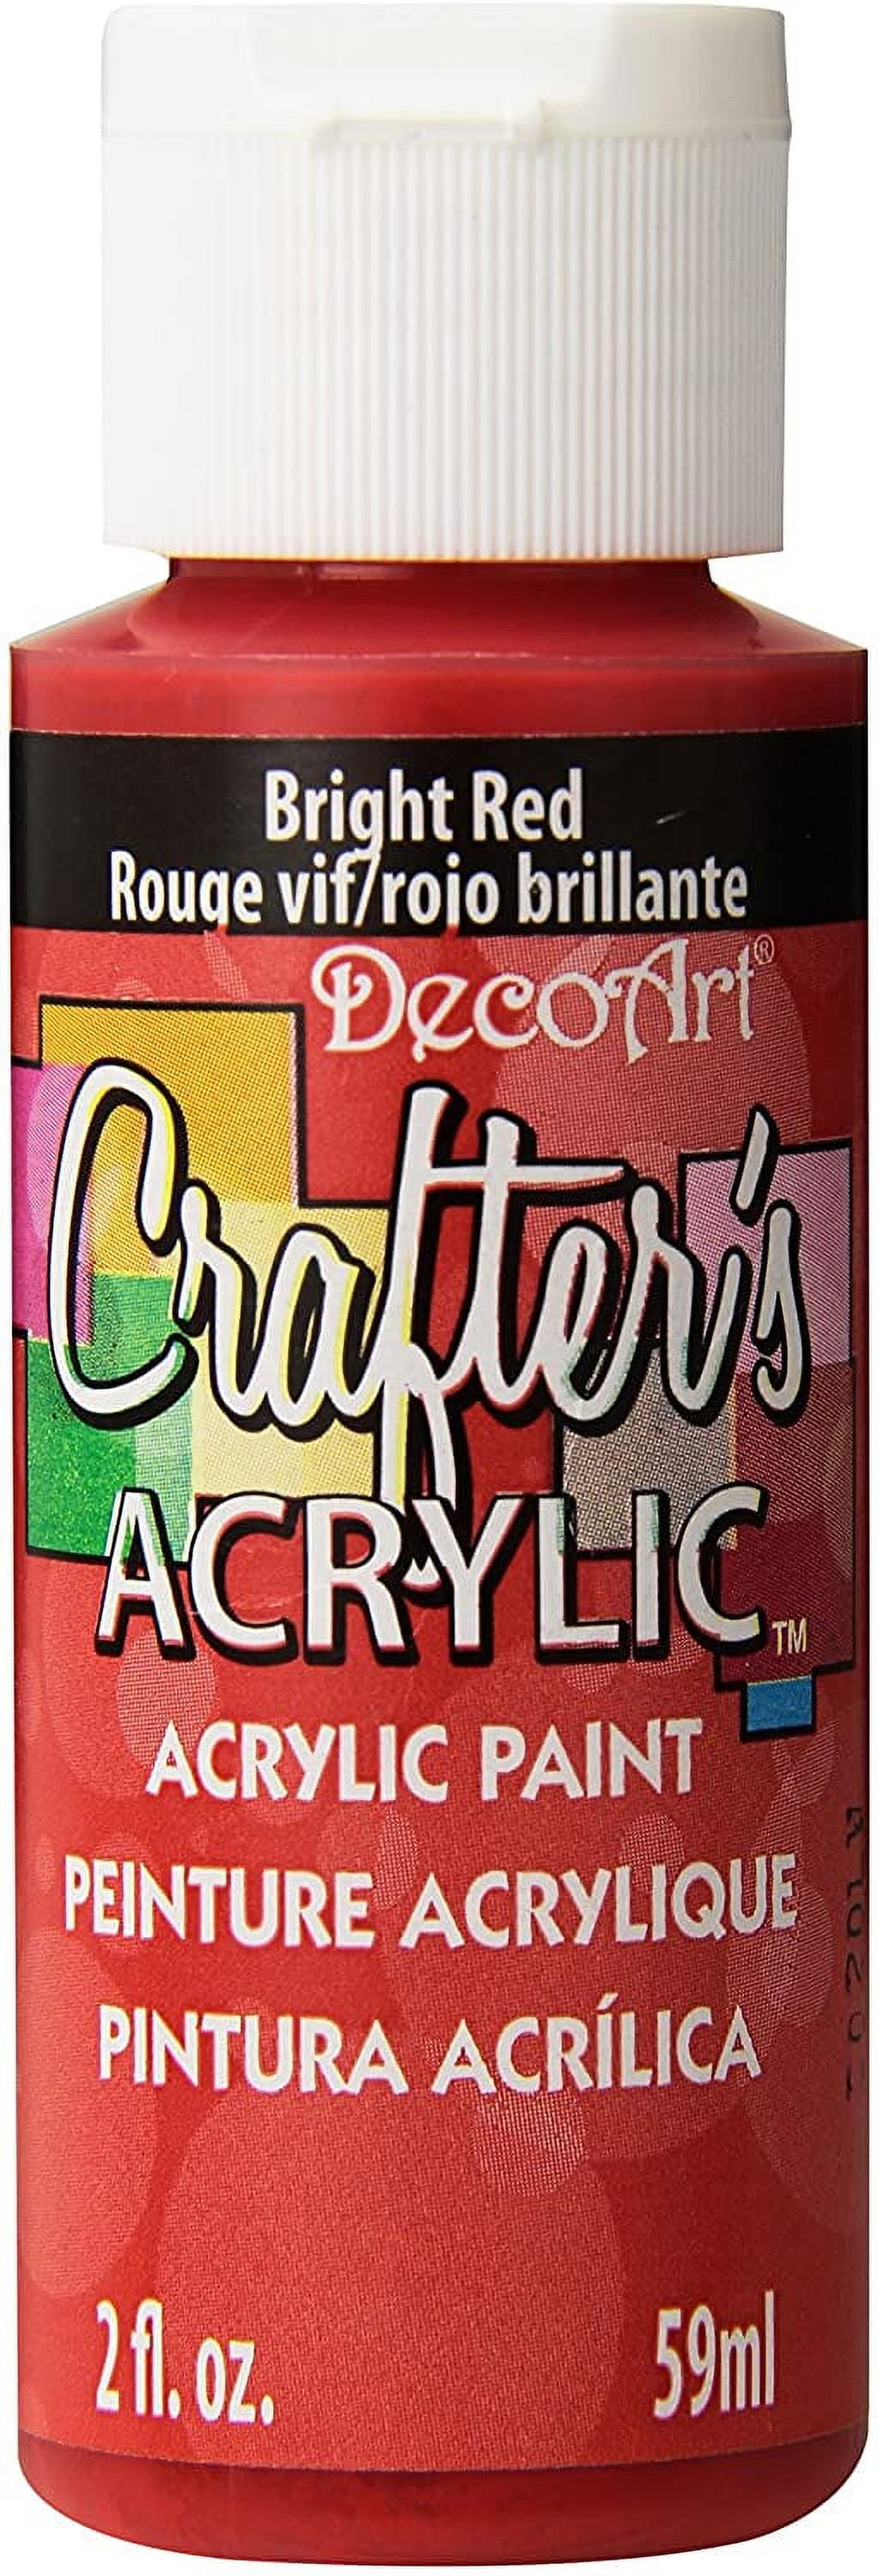 Decoart Crafter's Acrylic Value Pack 12/Pkg-Brights